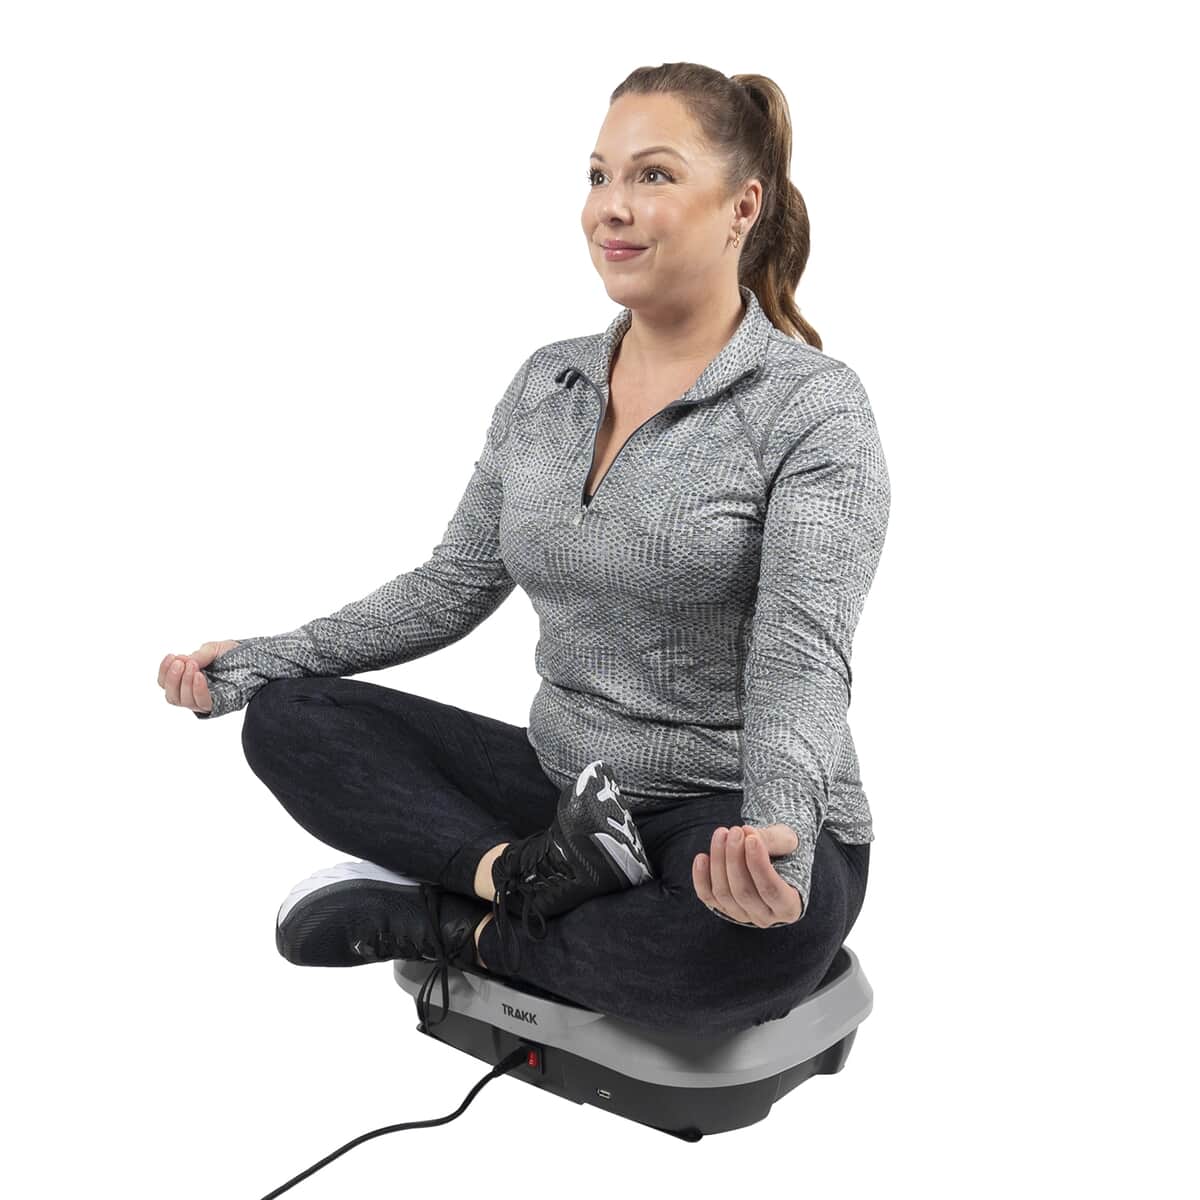 Trakk Plate Full Body Vibration Machine with Resistance Bands, Remote and Bluetooth Connection image number 5